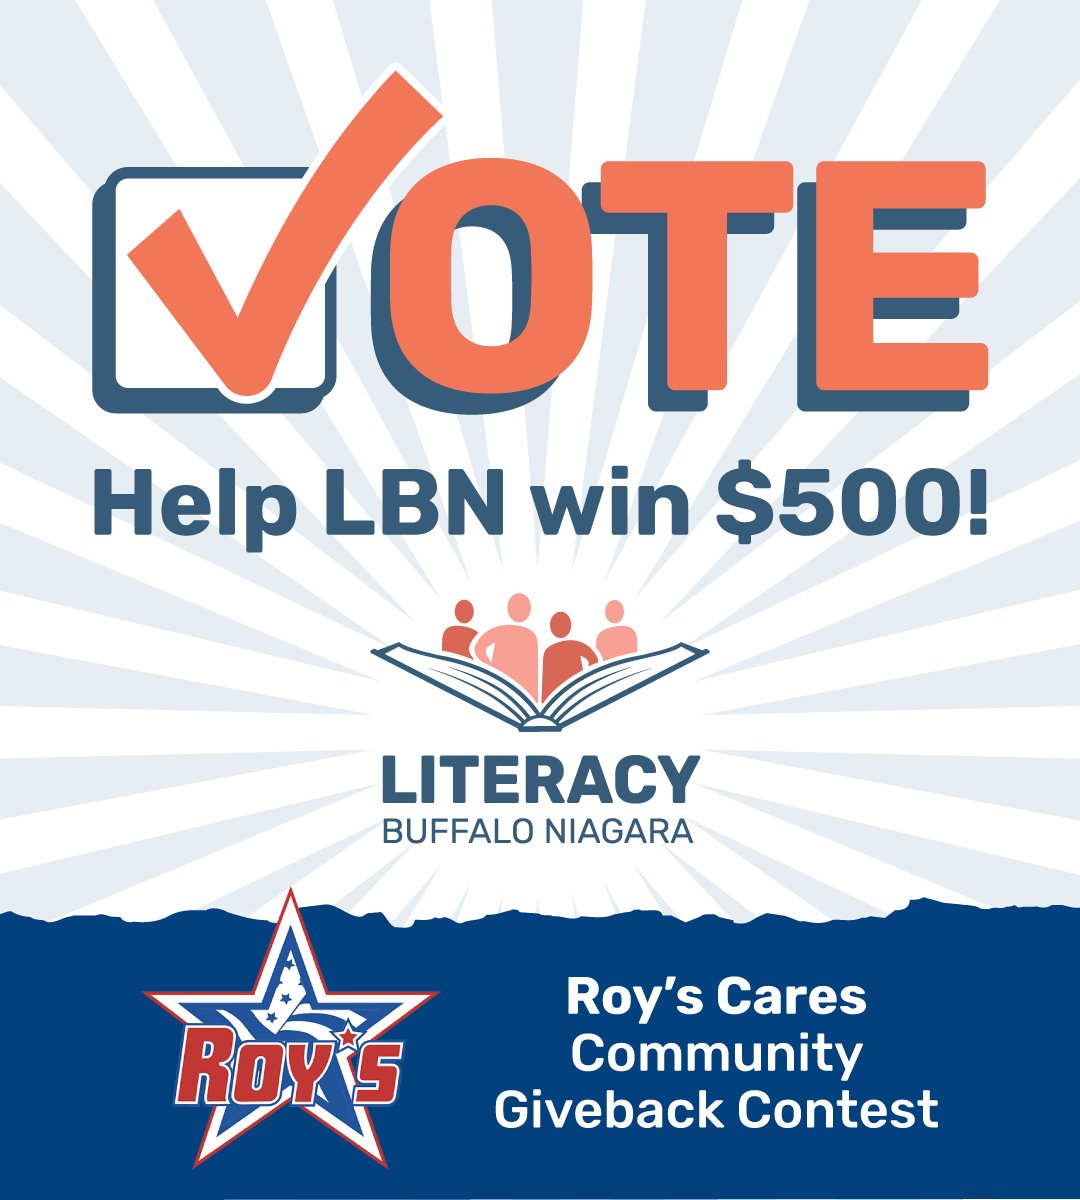 Help us secure $500 for Literacy Buffalo Niagara! Vote DAILY in the Roy's Cares Community Giveback Contest starting today, April 1st! Let's make a difference together! bit.ly/3xjvFG6 #RoysCares #LiteracyBuffaloNiagara #VoteDaily